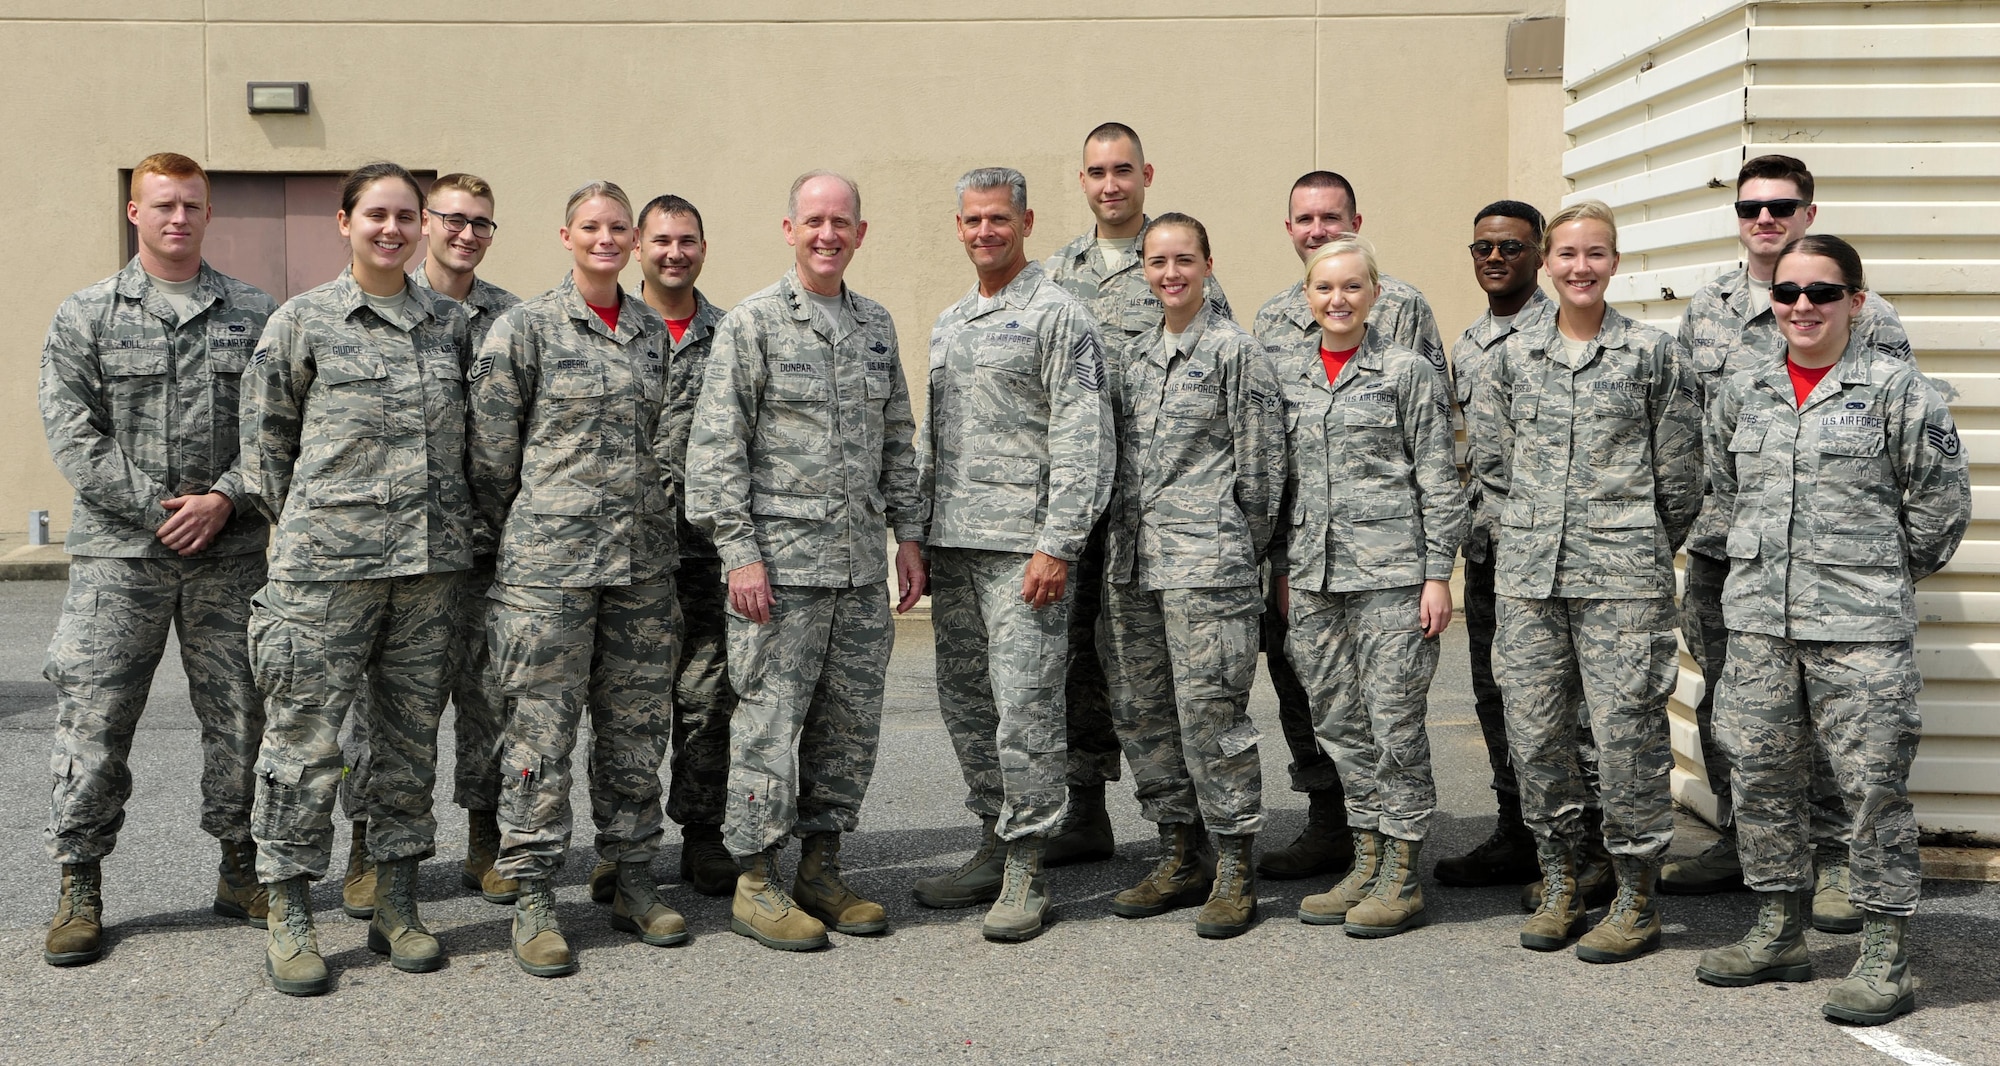 U.S. Air Force Maj. Gen. Donald Dunbar, Wisconsin’s adjutant general, and Chief Master Sgt. Thomas Safer, 115th Fighter Wing command chief, pose for a photo with Airmen from the 115th FW, at Kunsan Air Base, Republic of Korea, Sept. 15, 2017. Dunbar and Safer visited the 115th FW Airmen deployed to Kunsan for a 4-month rotation as part of a Theater Security Package, which helps maintain regional security and stability.  (U.S. Air Force photo by Senior Airman Colby L. Hardin)